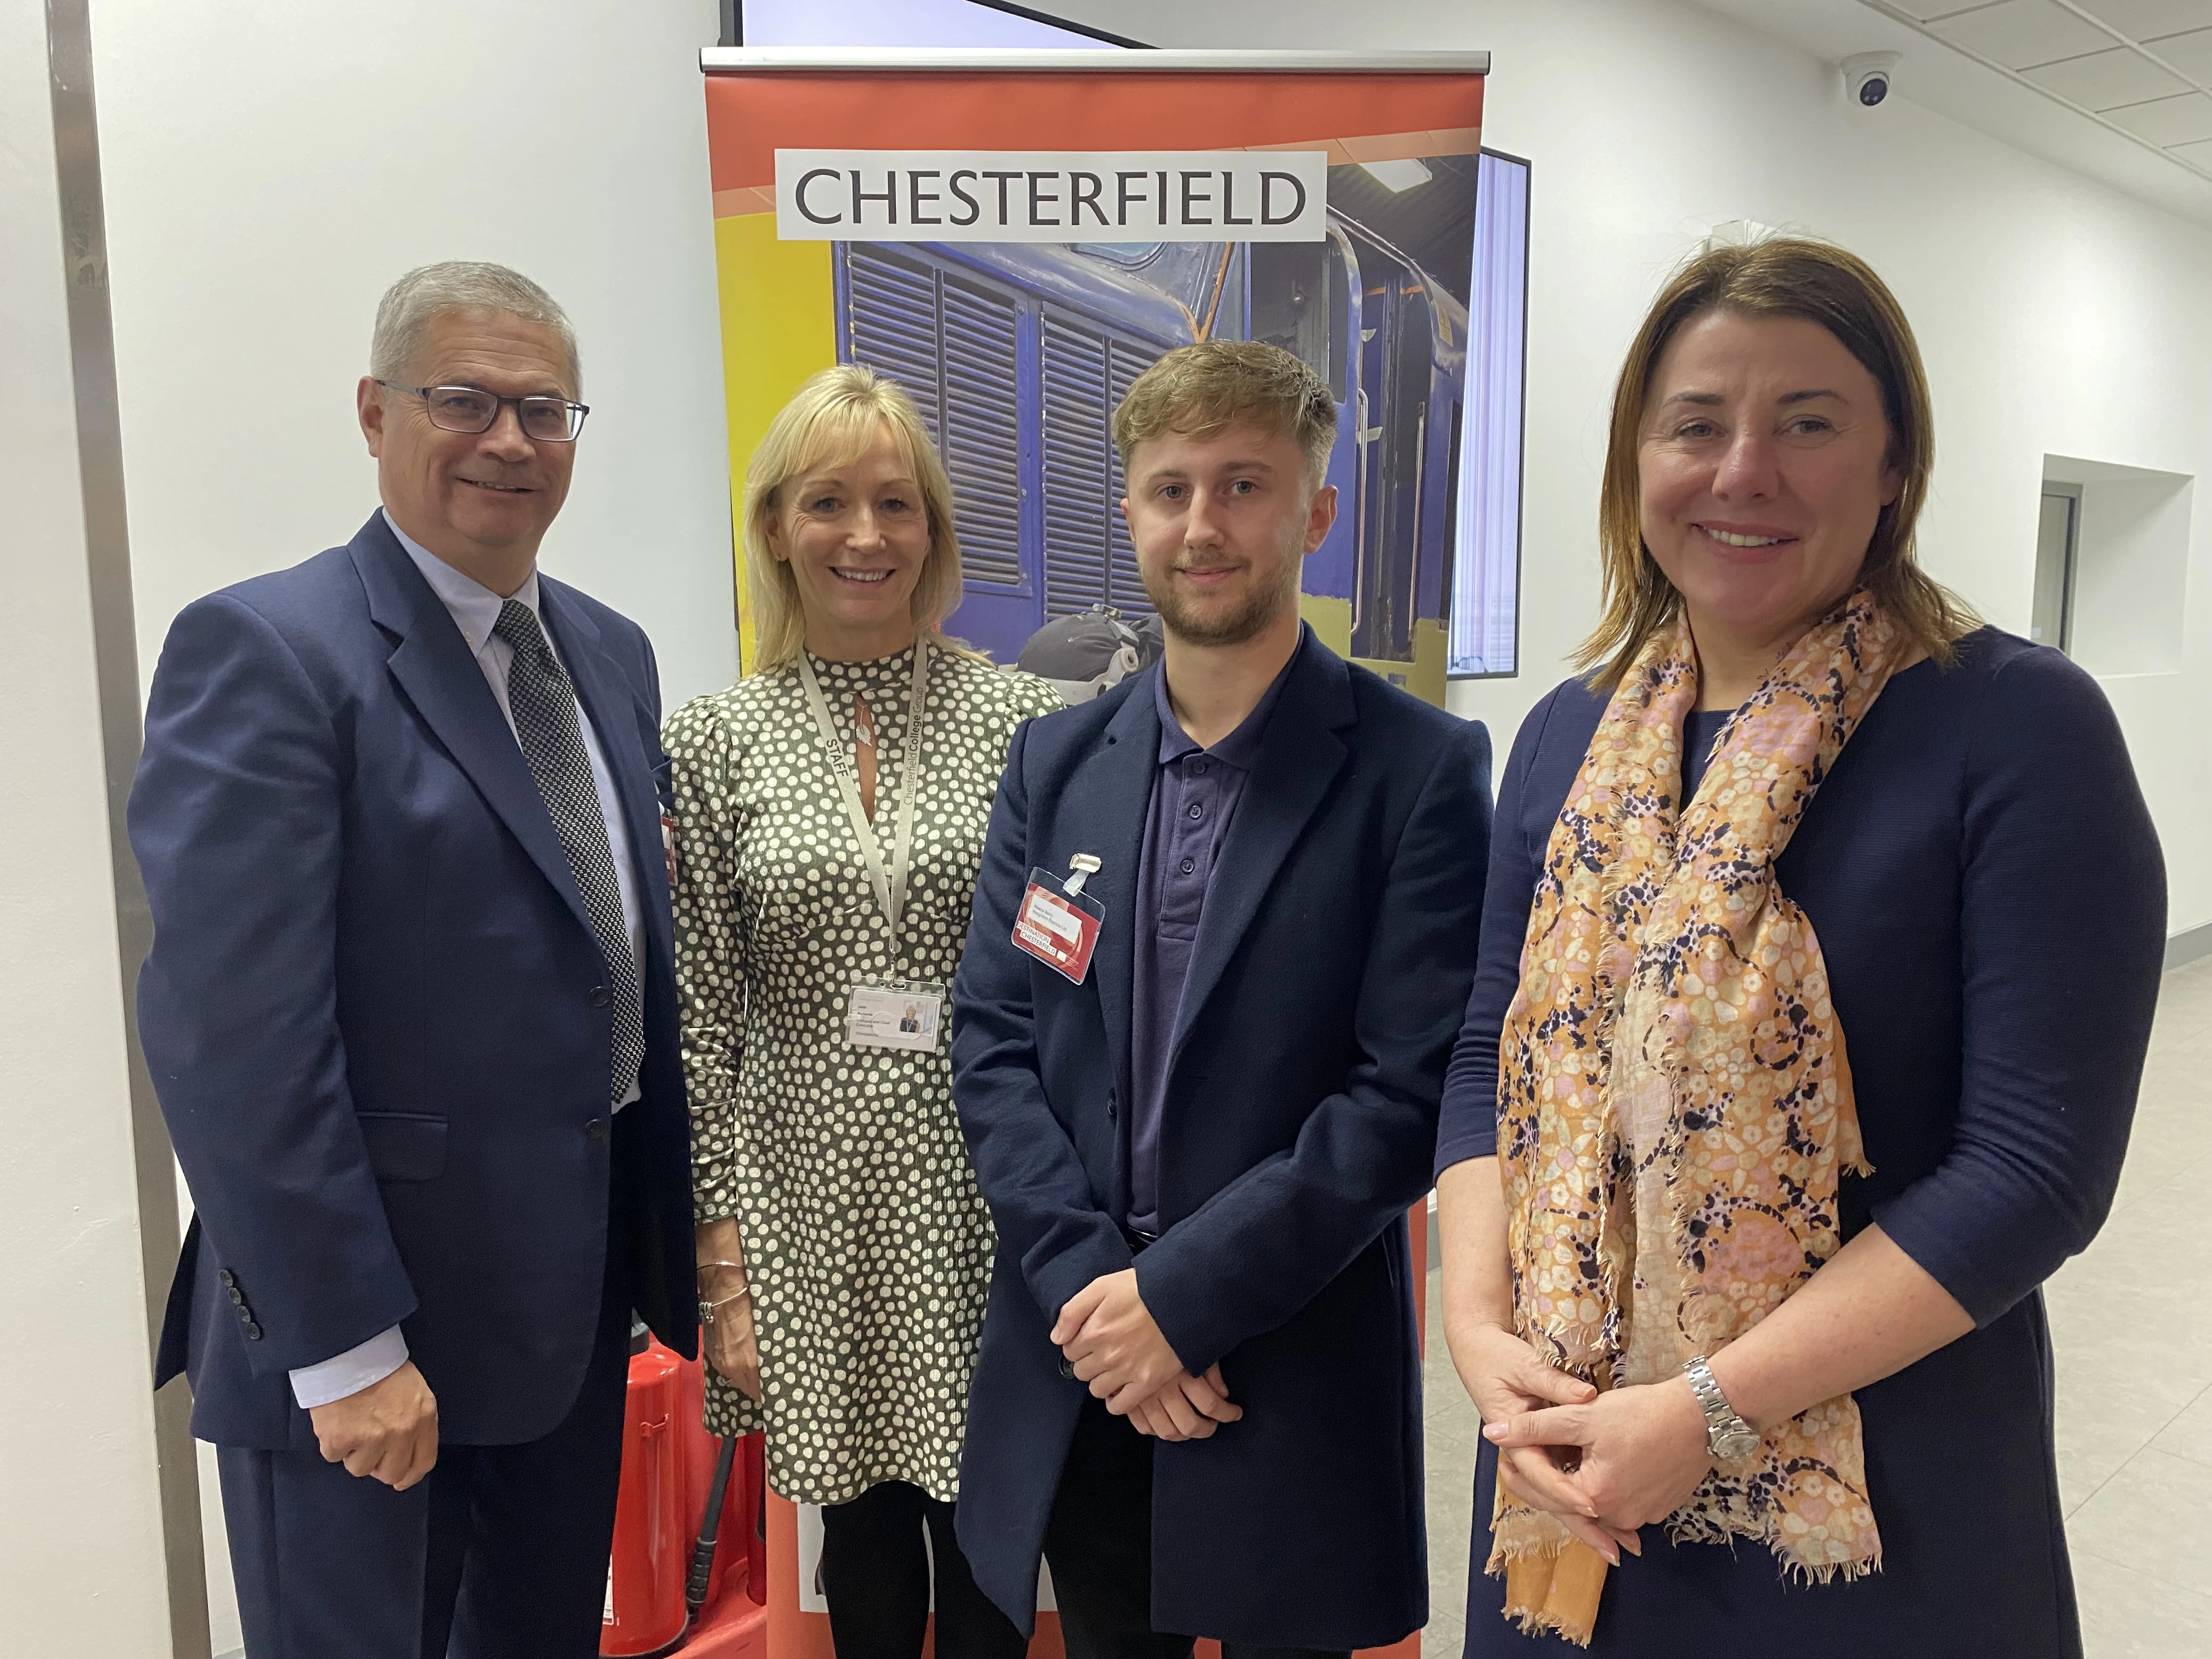 Speakers at the 2022 Made in Chesterfield launch event